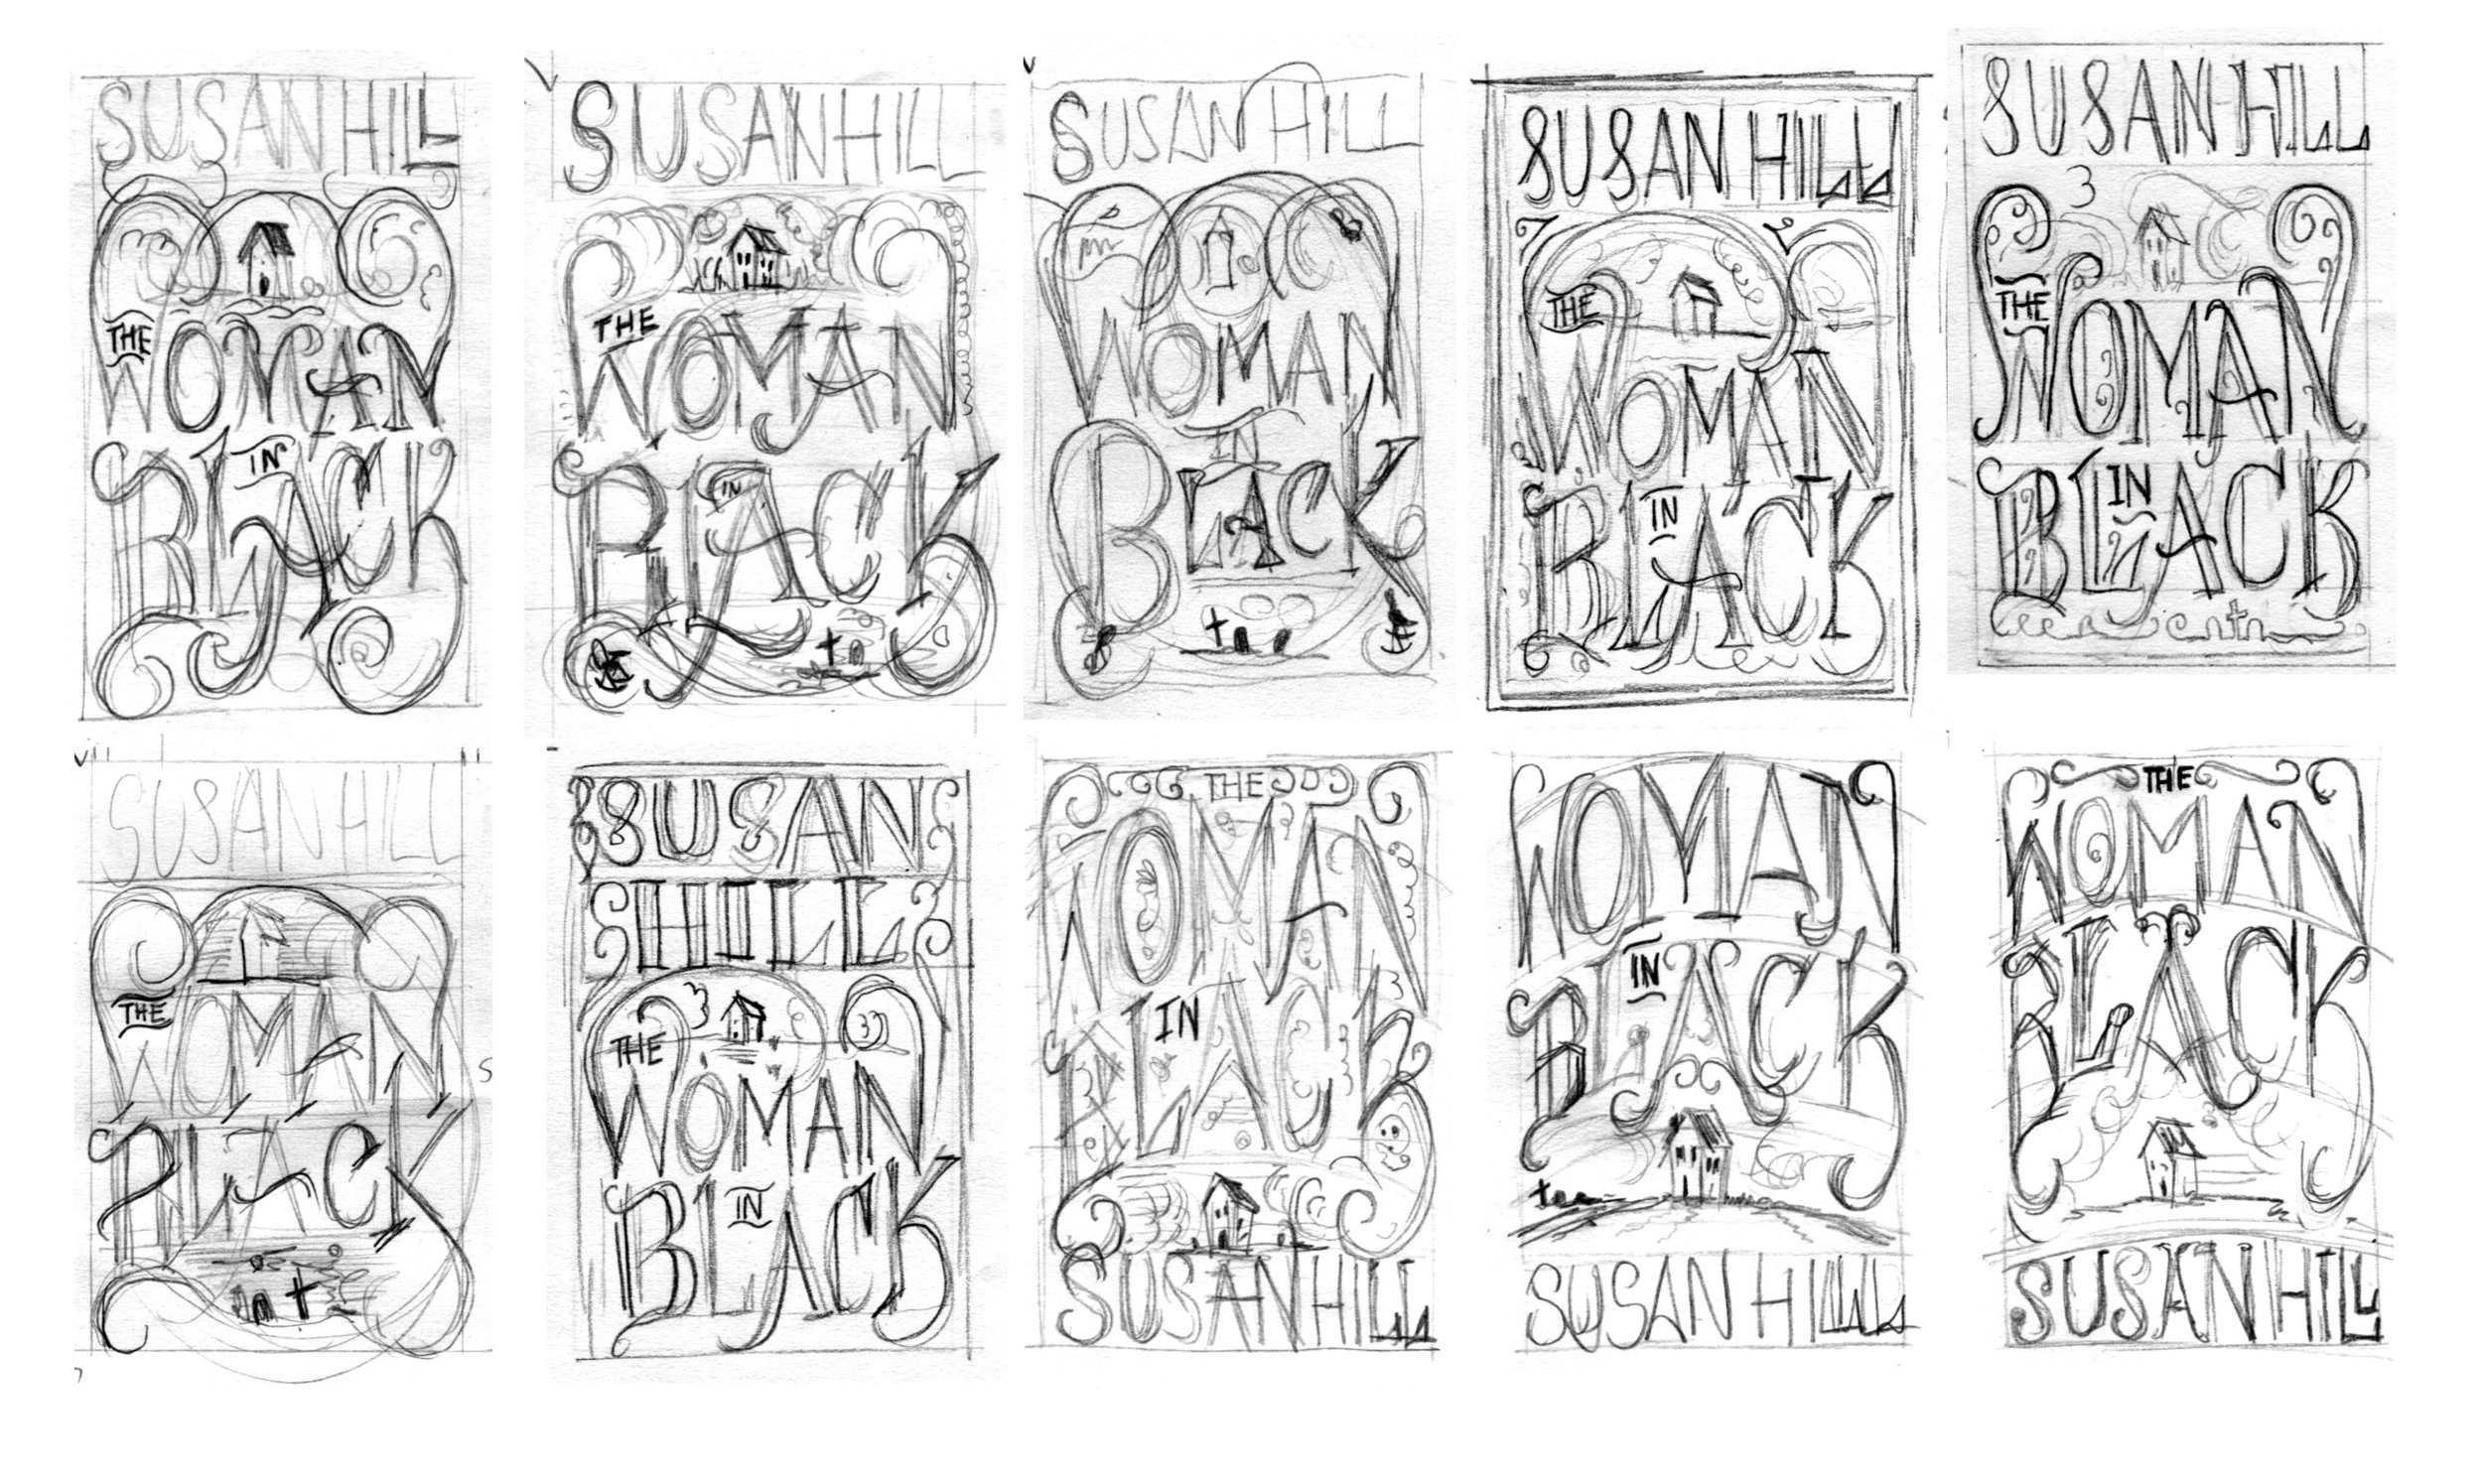 The Woman in Black cover thumbnails sketches